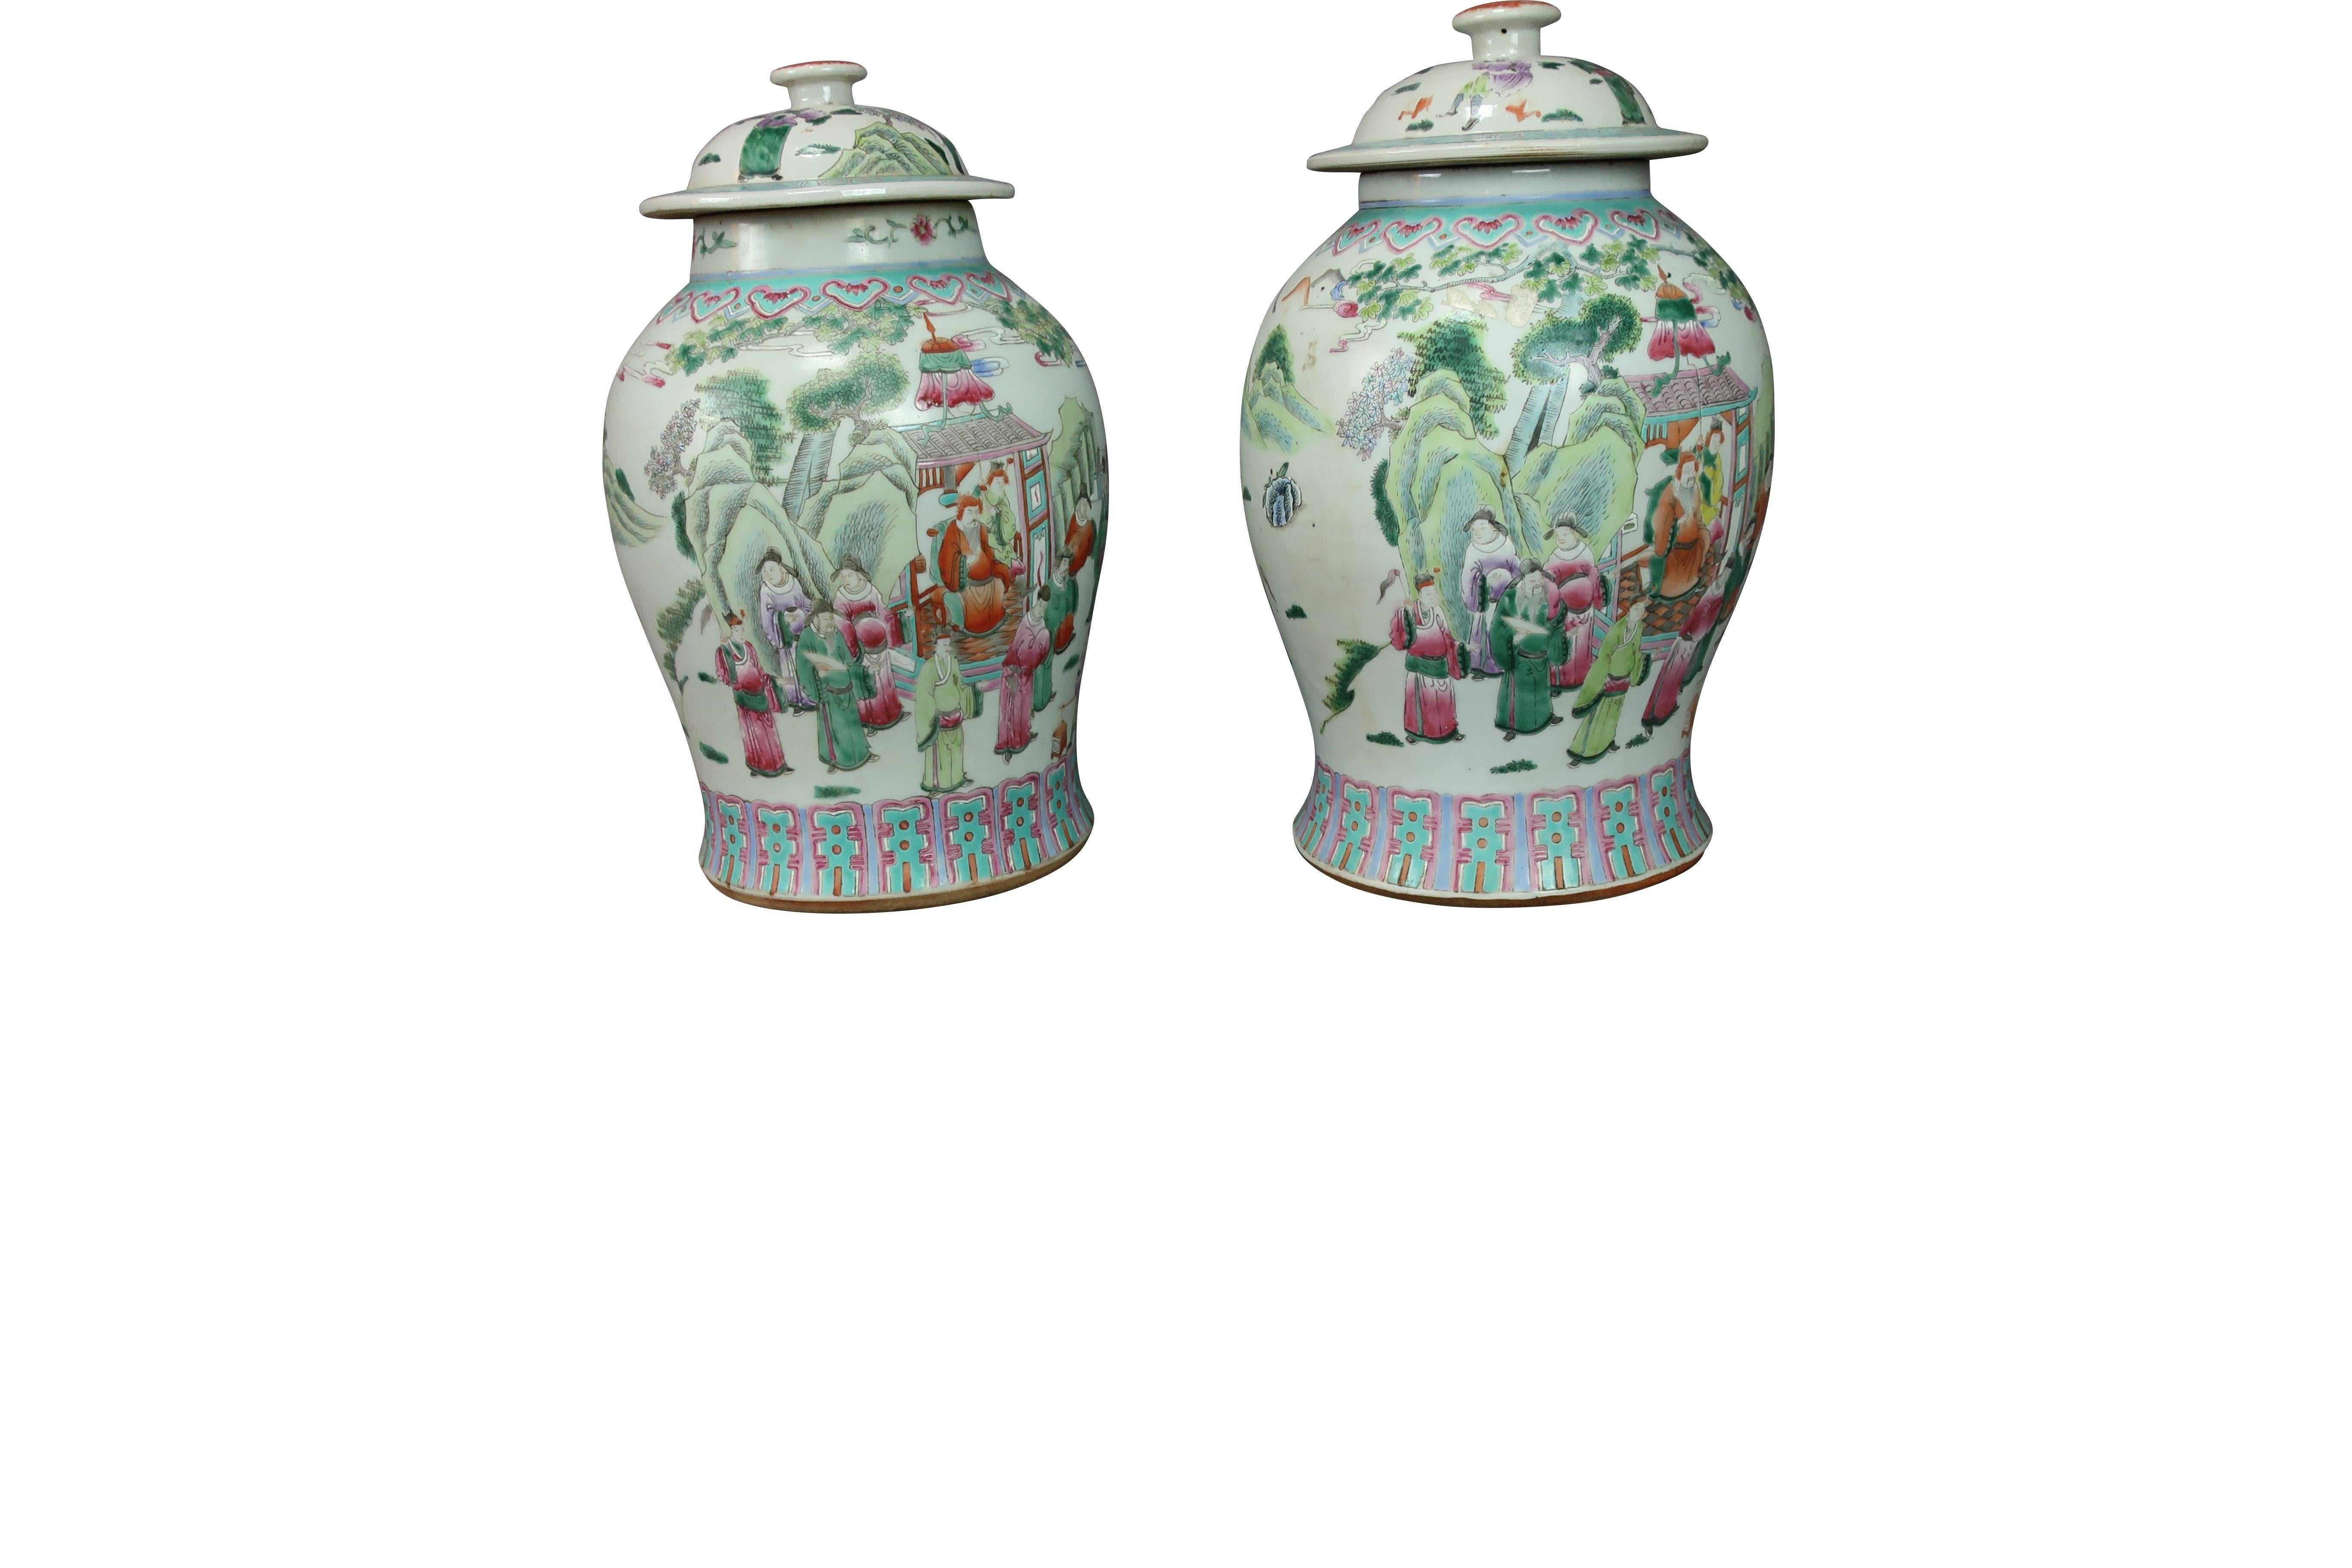 Pair of Chinese Porcelain ginger jars with covers, blue, green coral and, pink coloration decorated with a Chinese village landscape design.